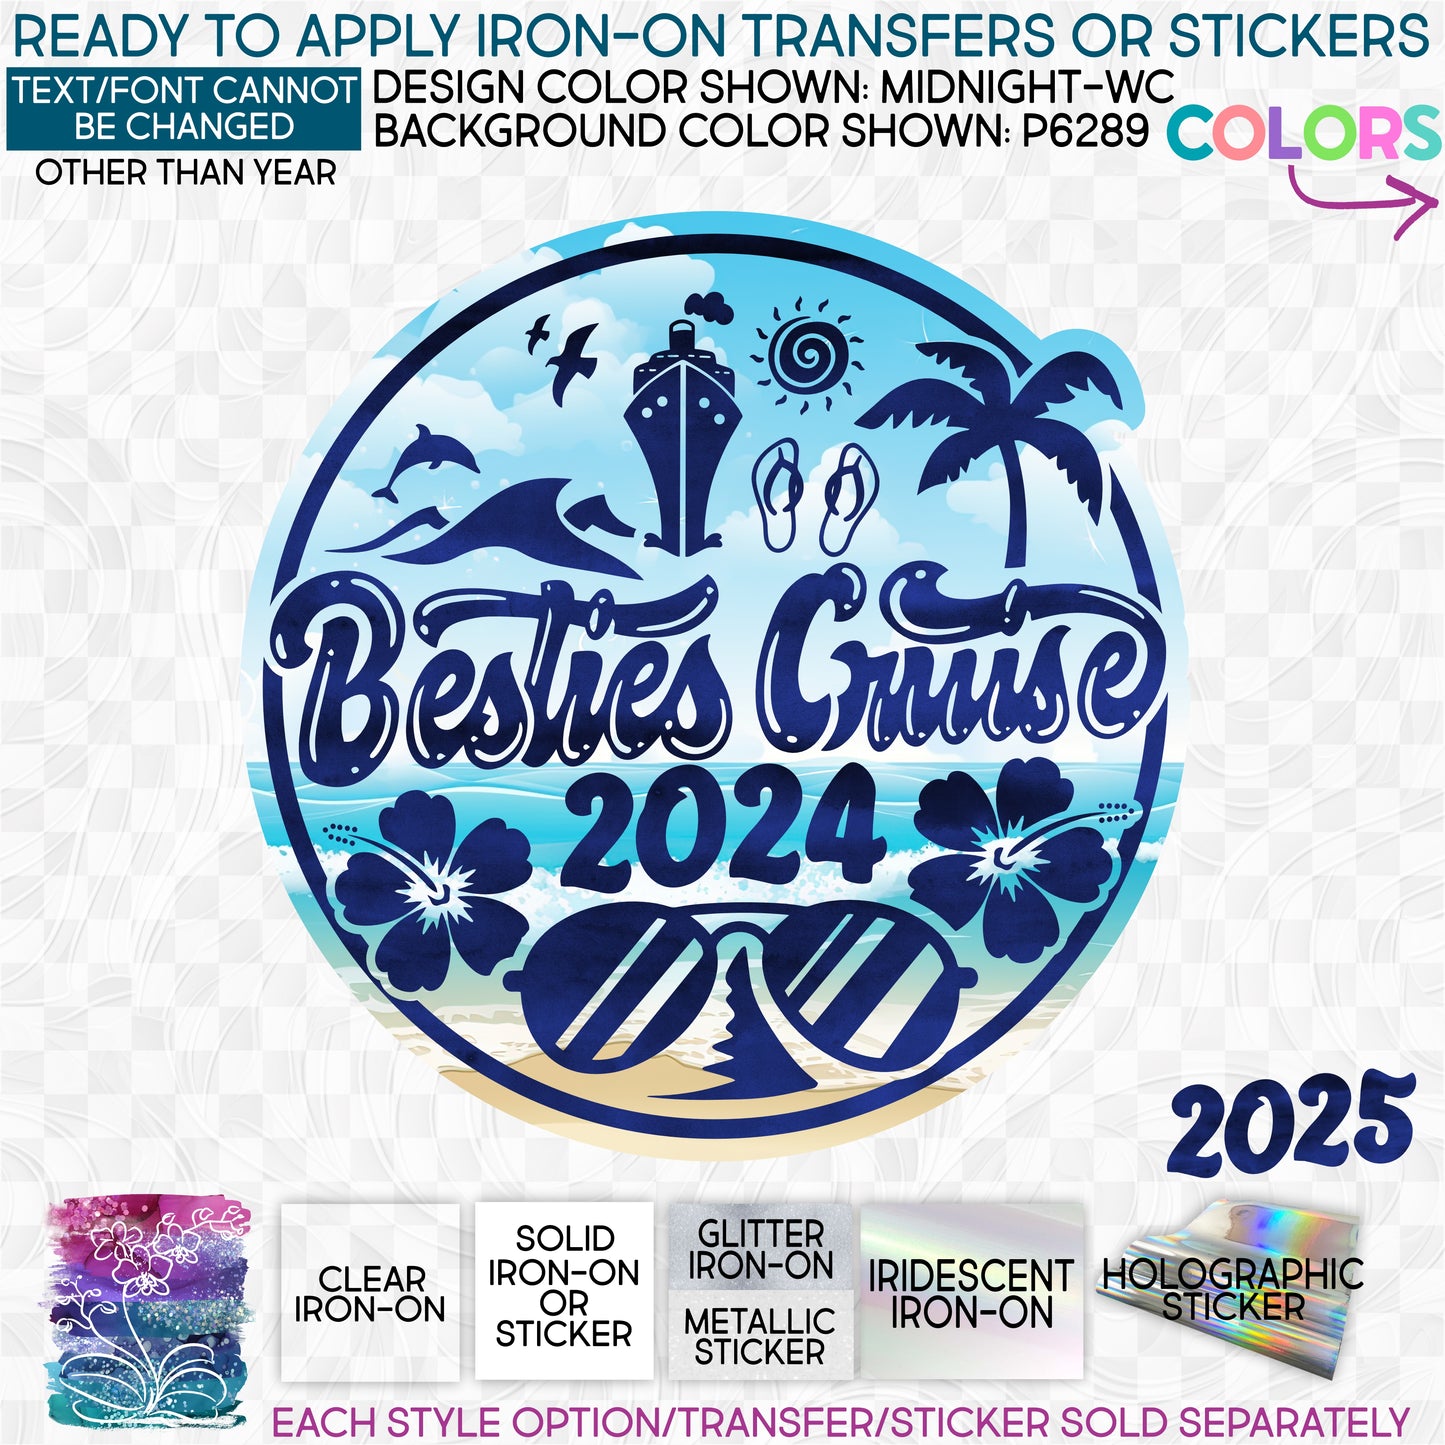 (s329-A2) Besties Cruise 2024 2025 Any Year Glitter or Vinyl Iron-On Transfer or Sticker